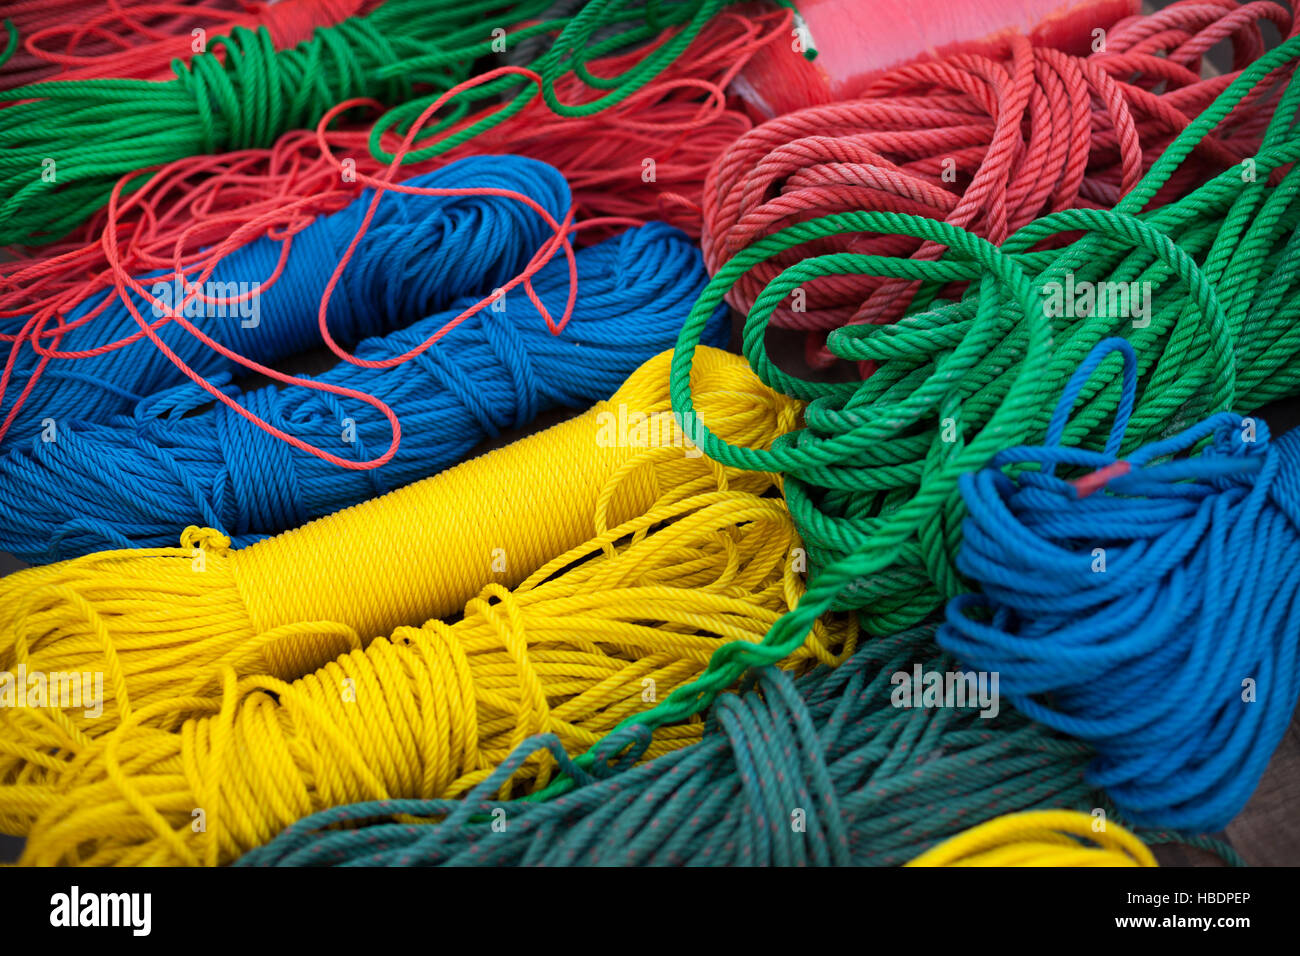 Variety of colored twisted rope Stock Photo